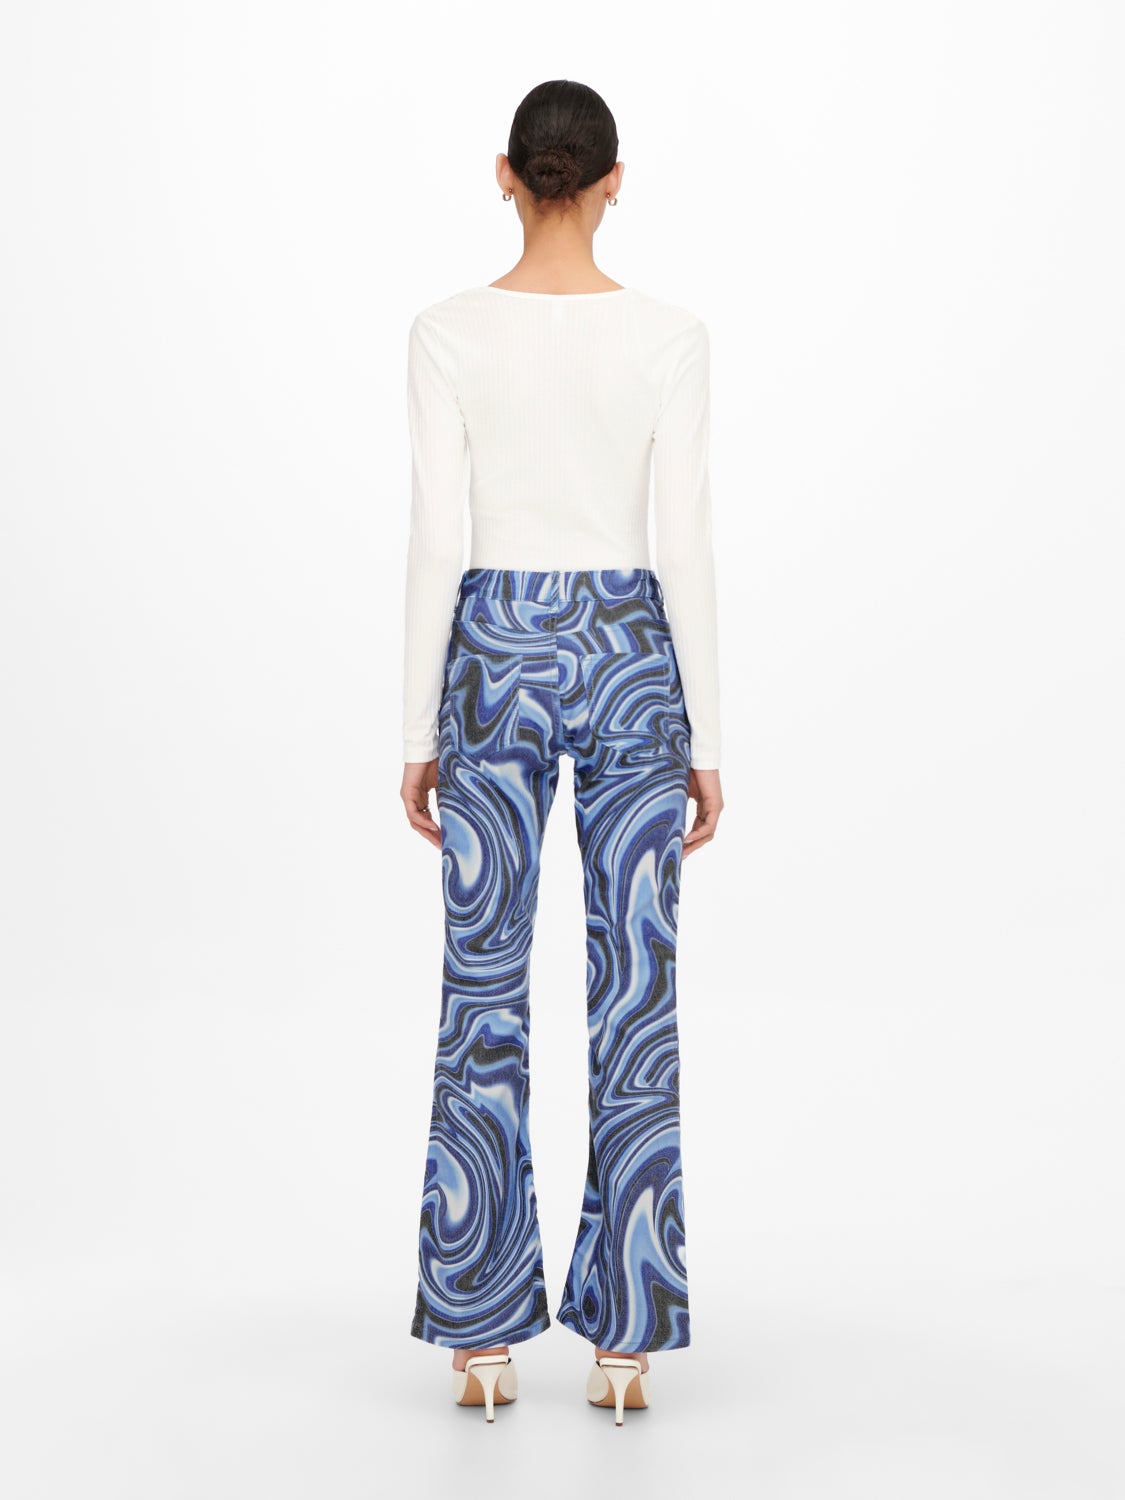 Zoven Flare Trouser in 70s Ripple  Patterned pants outfit Funky outfits  Flared pants outfit